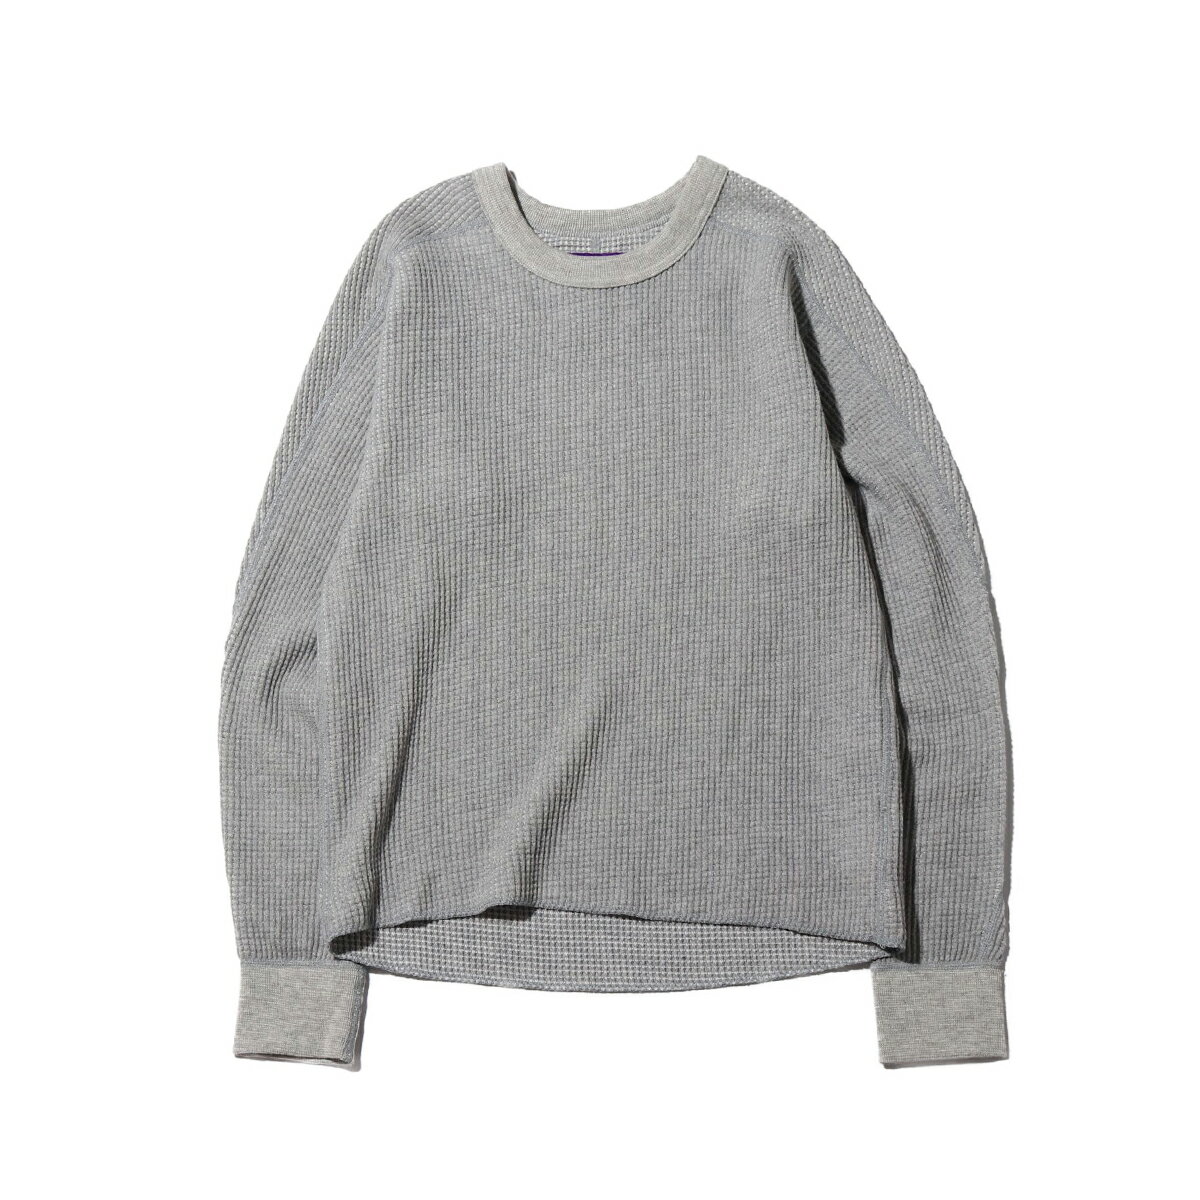 THE NORTH FACE PURPLE LABEL CREW NECK THERMAL (UEm[XEtFCX p[v[x N[lbN T[})MIX GRAY Y TVc 19SS-I